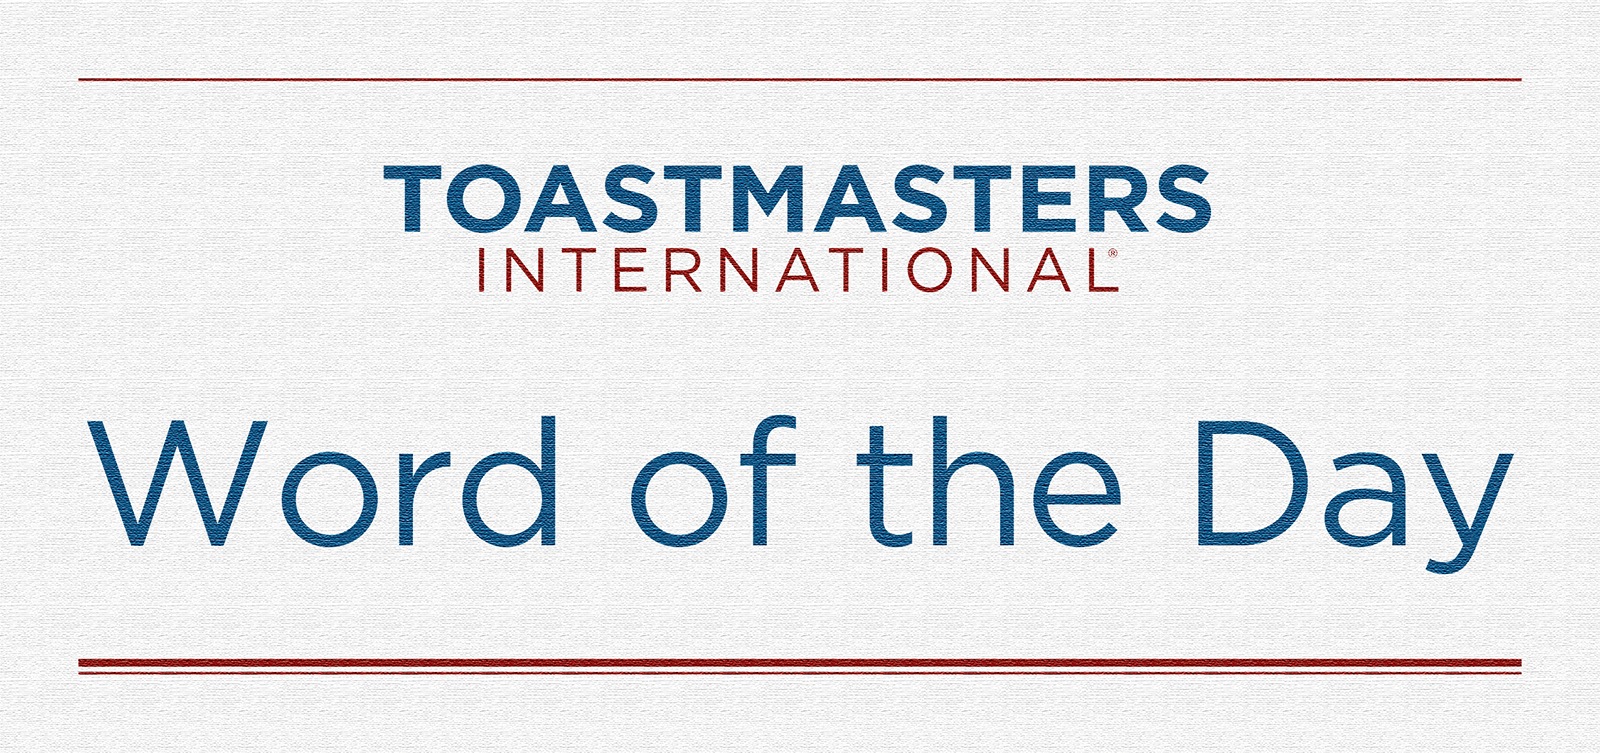 Image showing the words Toastmasters International and Word of the Day